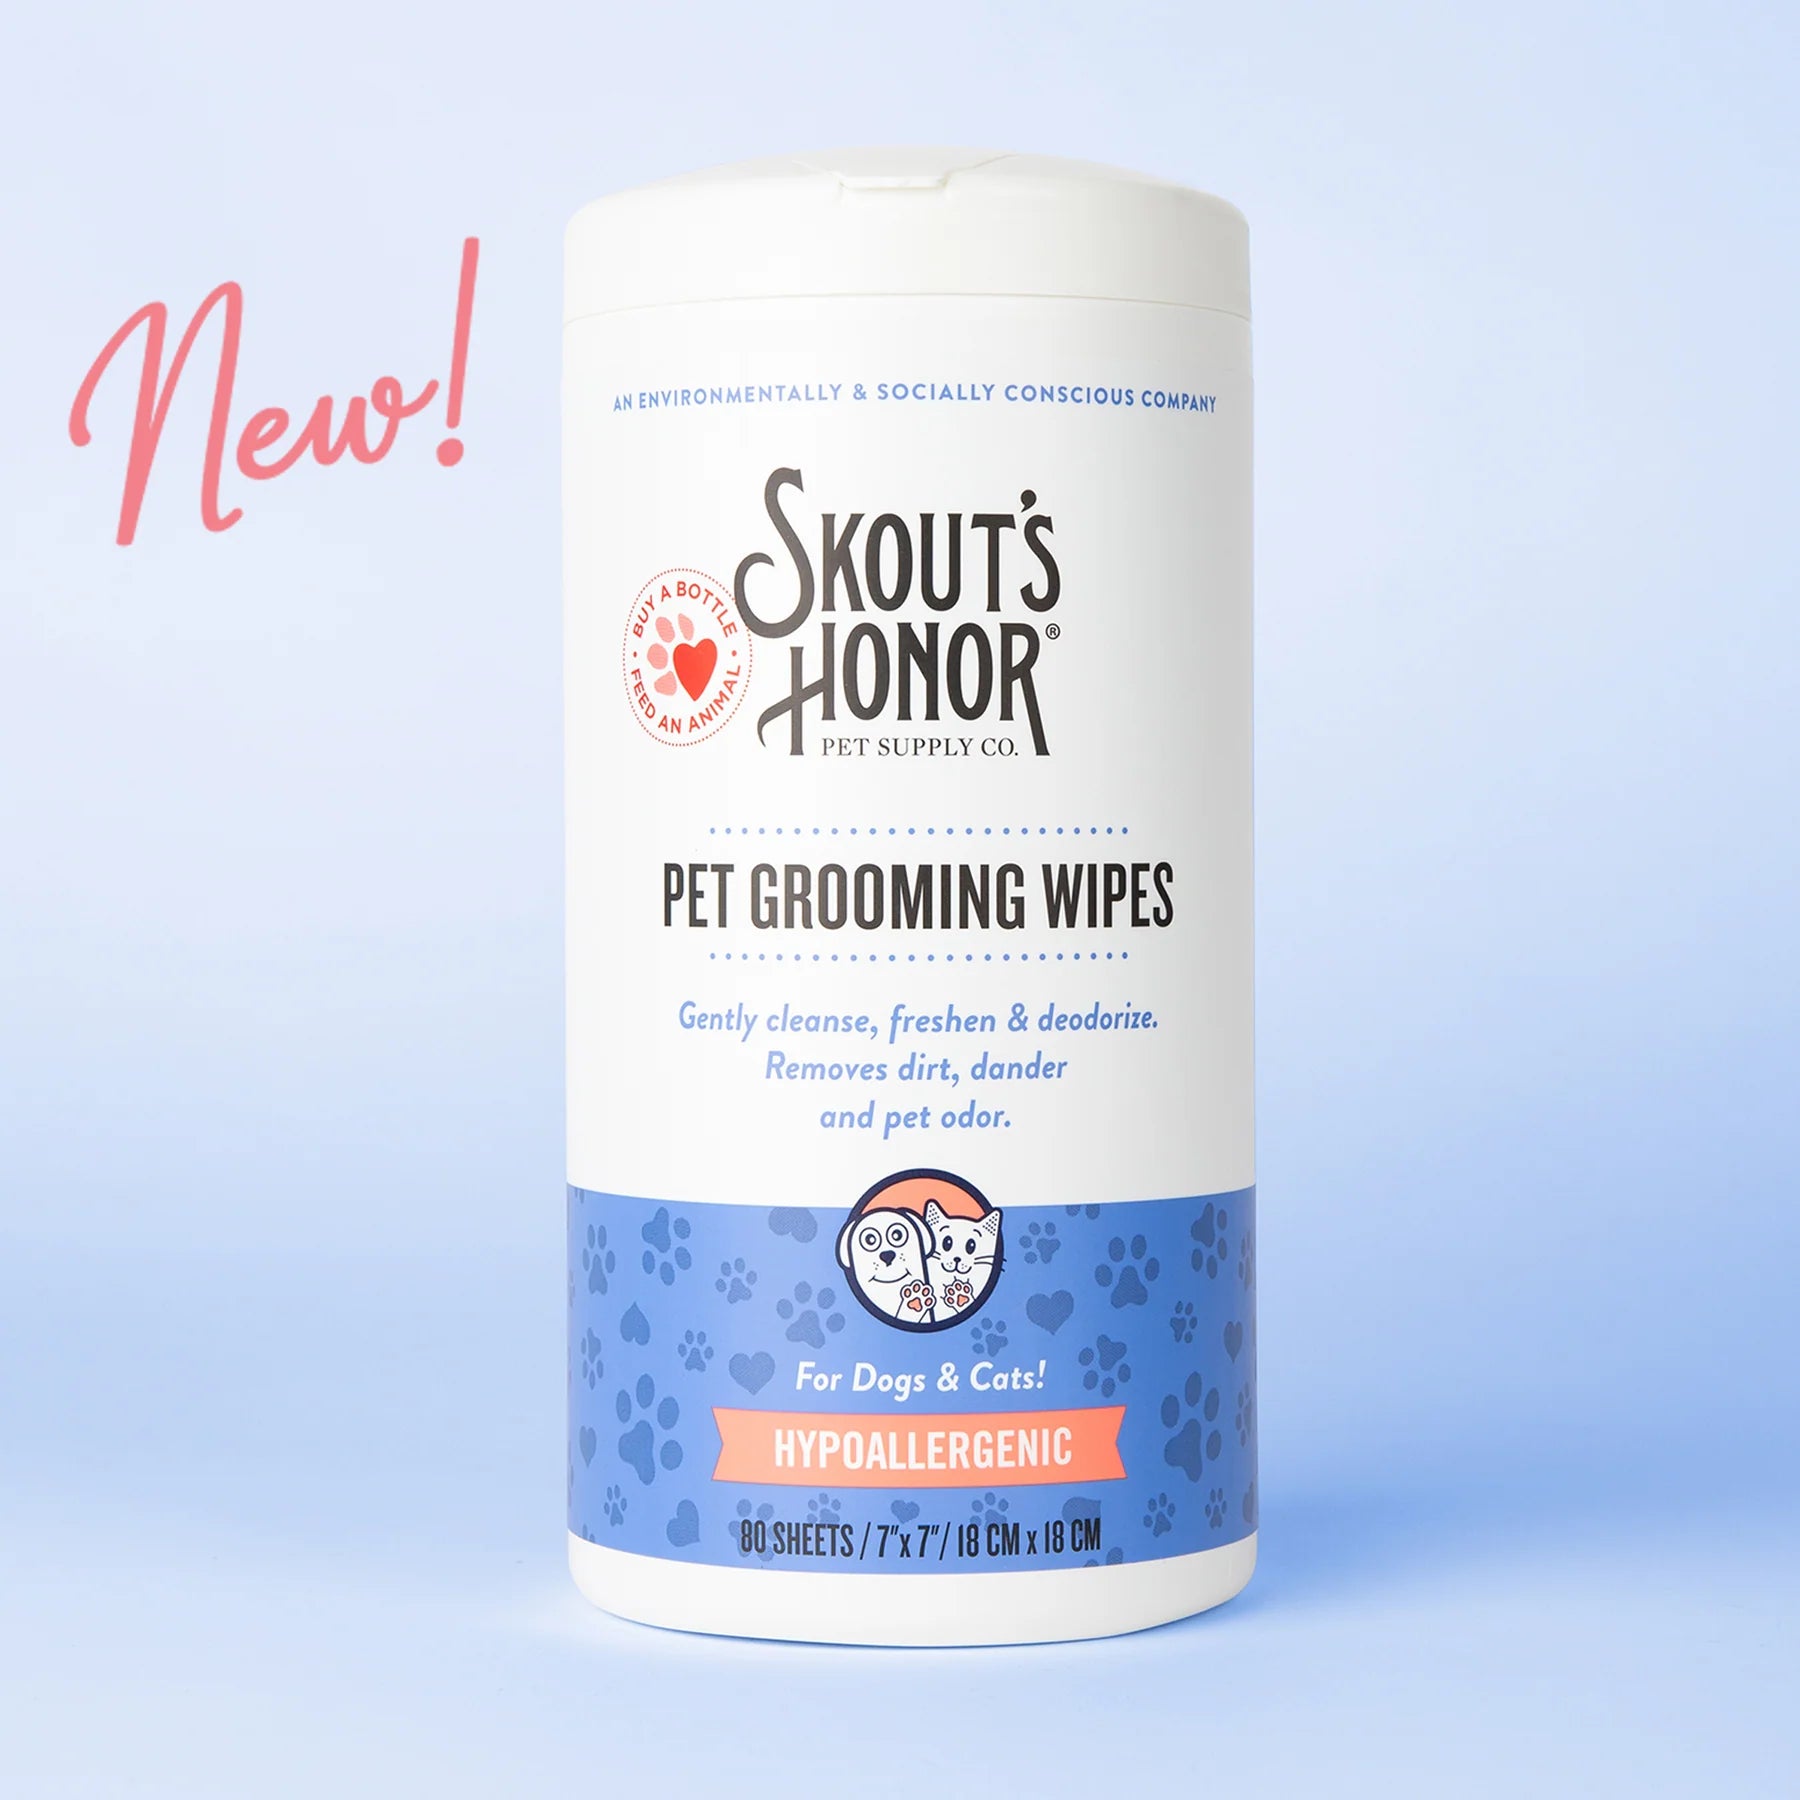 Pet Grooming Wipes for Cats & Dogs